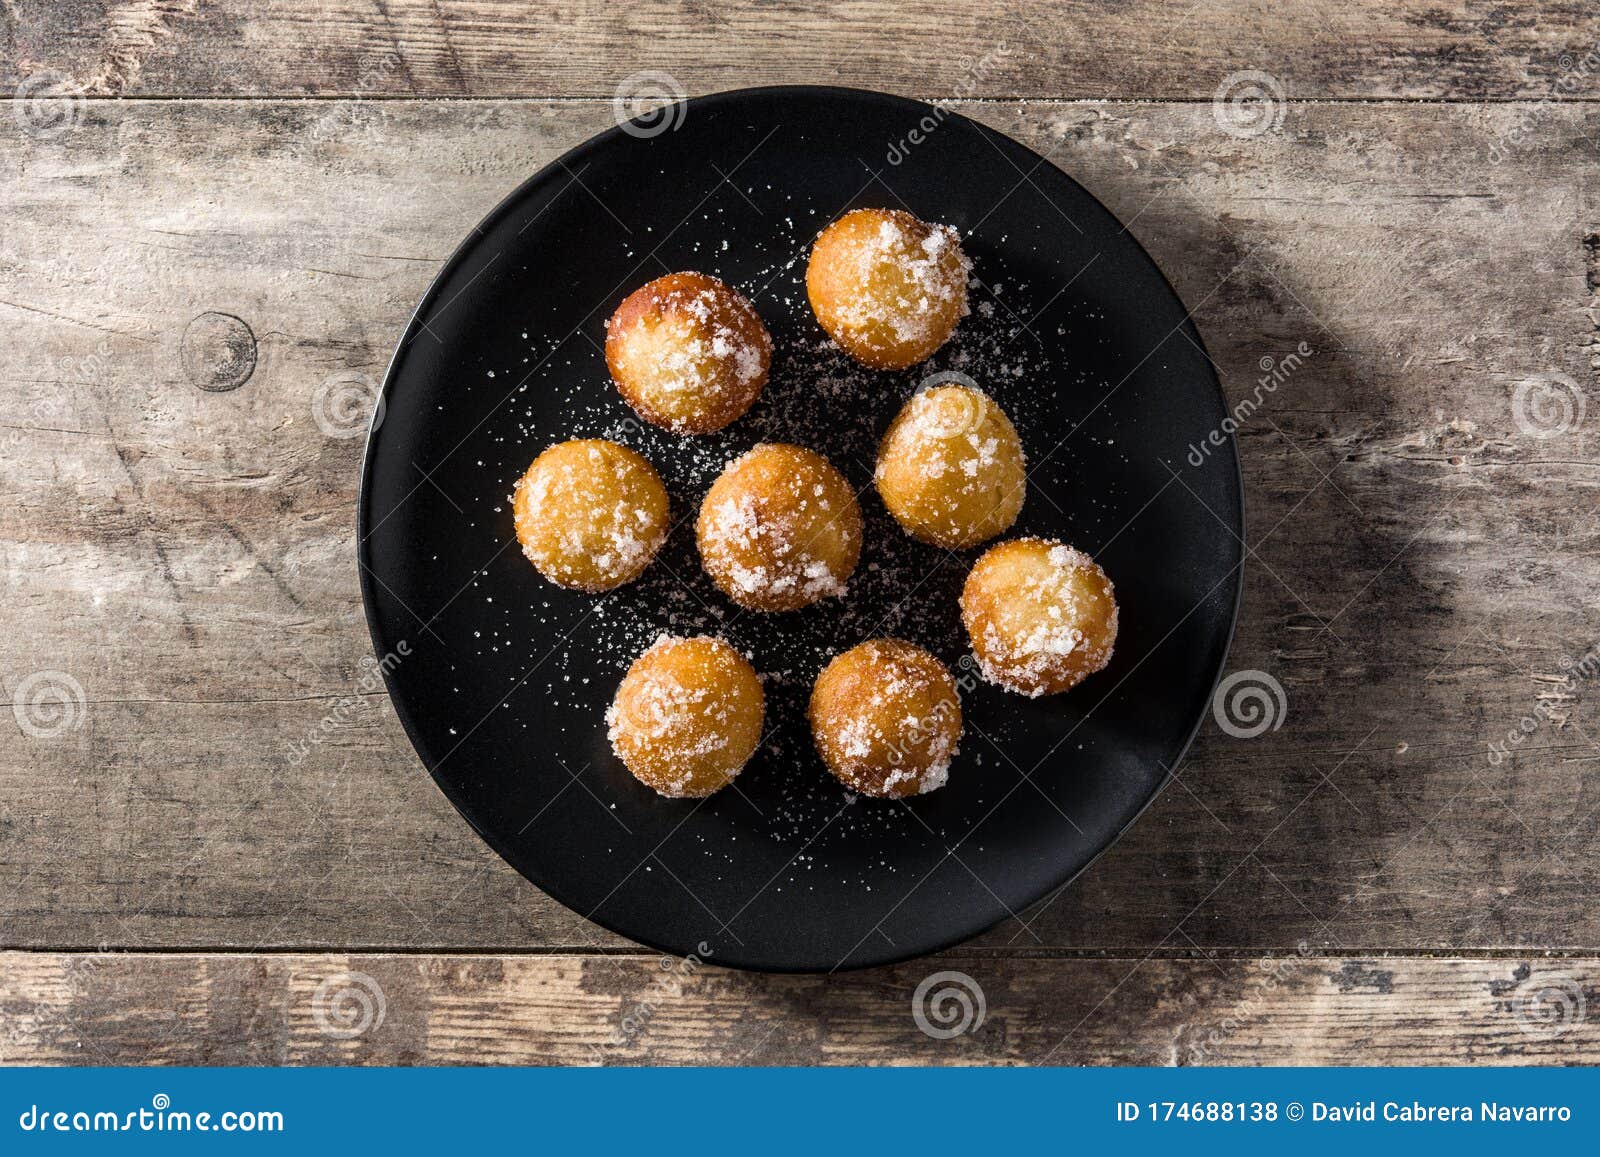 carnival fritters or buÃÂ±uelos de viento